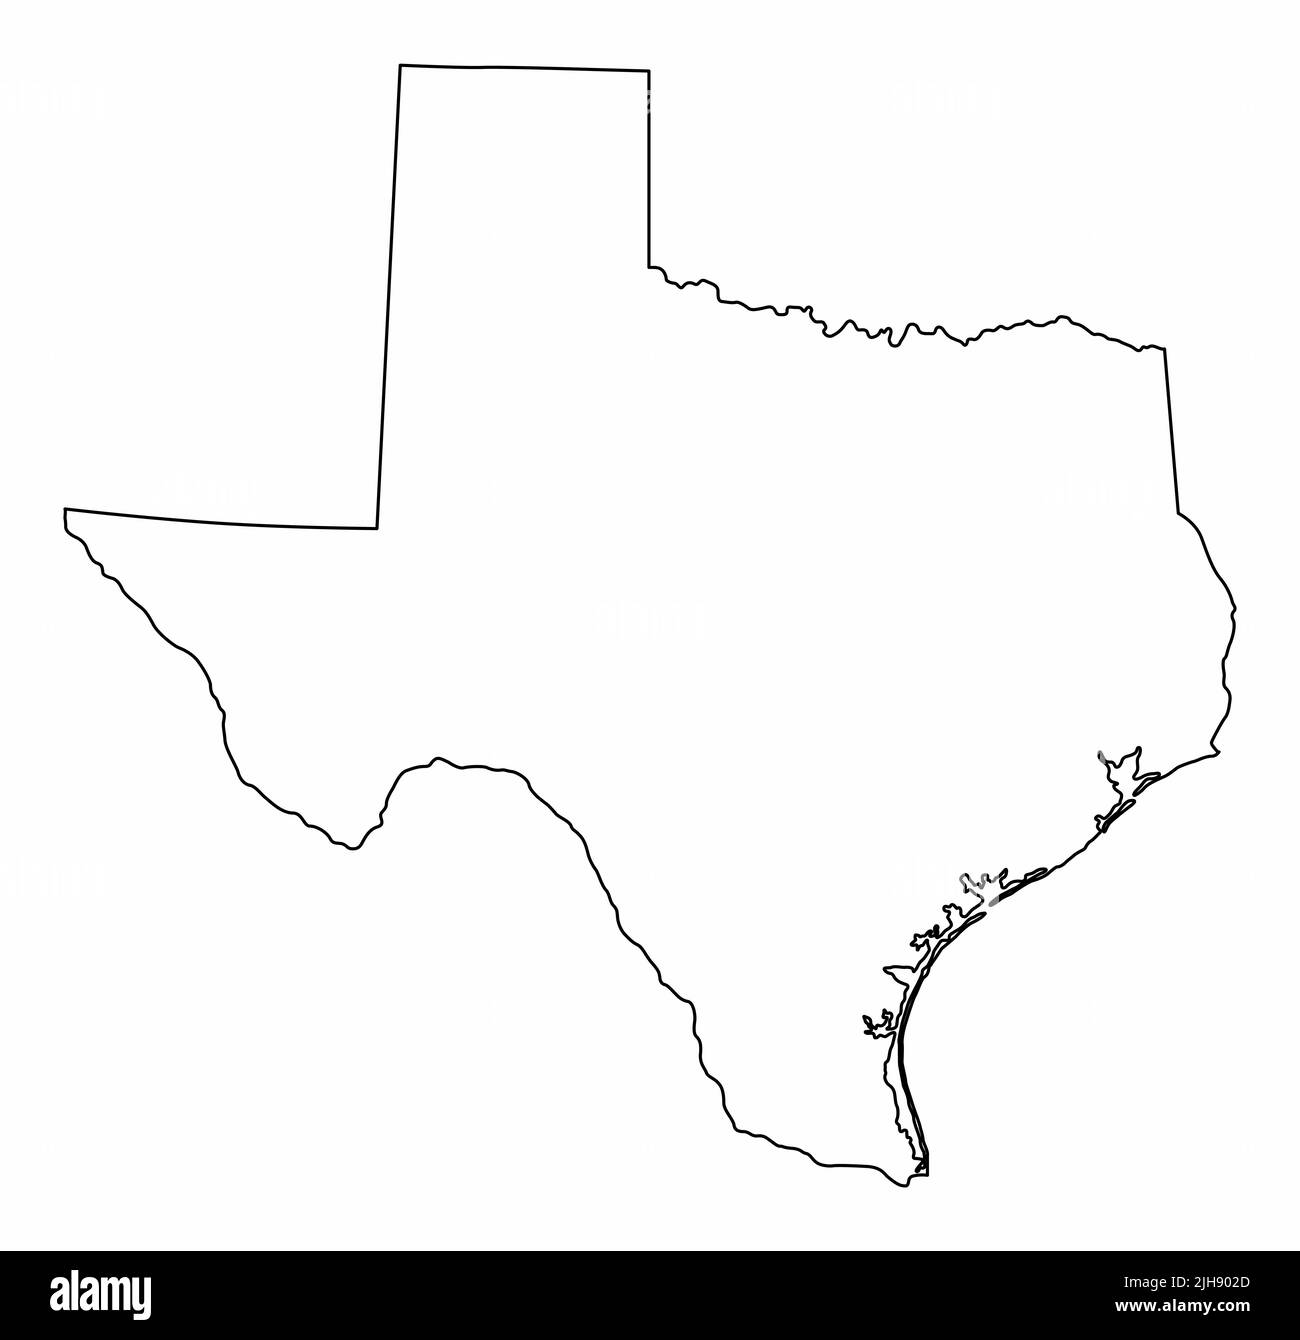 Texas State isolated map. Black outlines on white background. Stock Vector